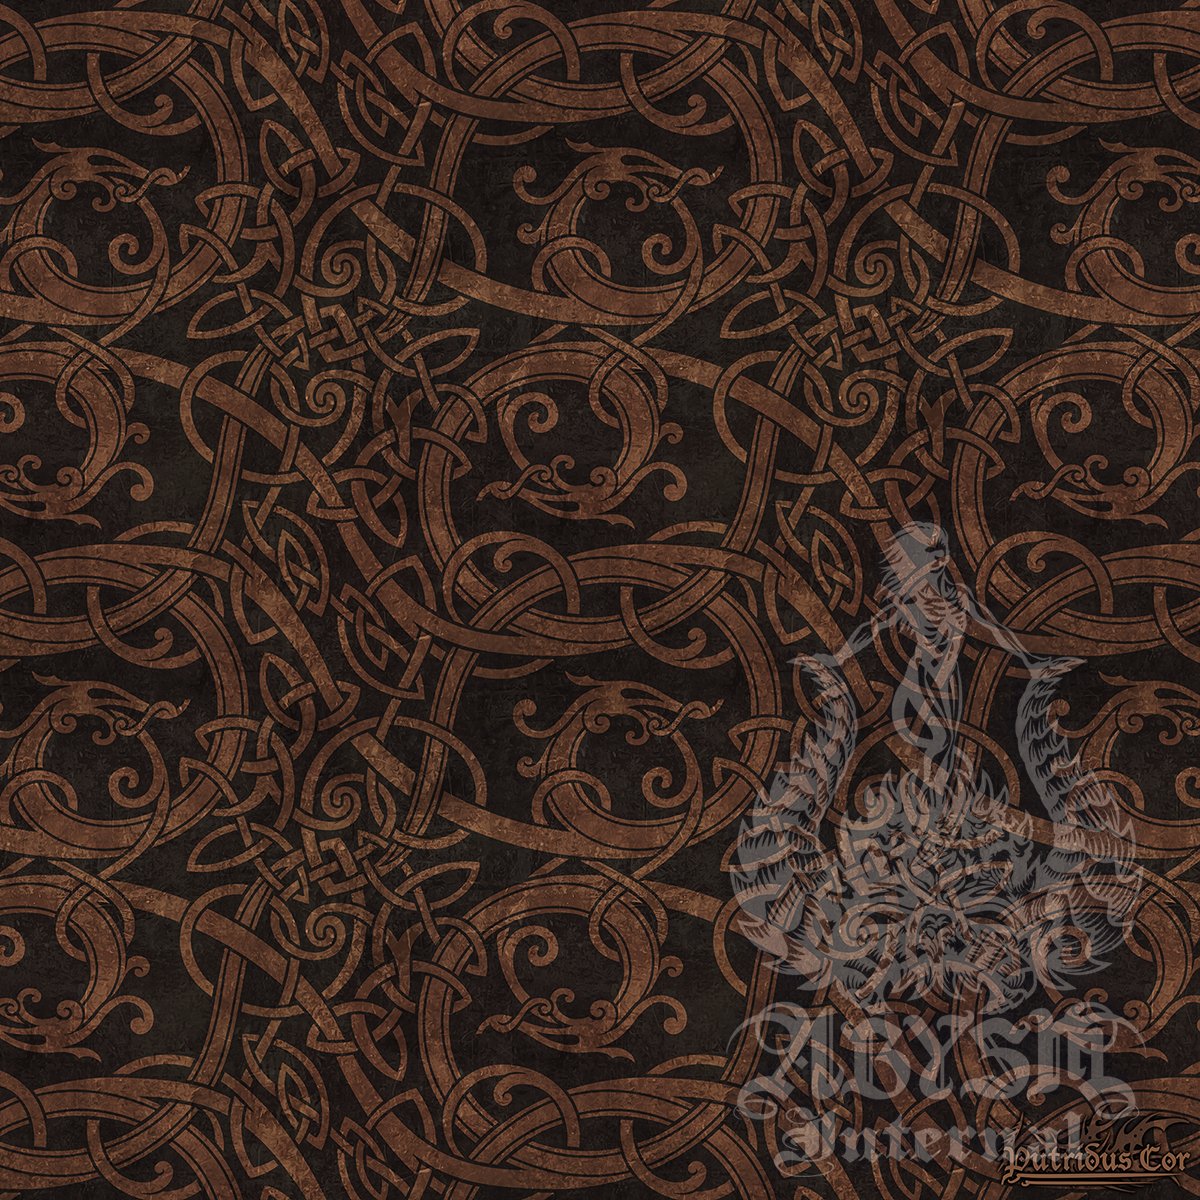 Custom Viking Seamless Patterns, Personalized Norse, celtic or tribal Knotwork art for fabric or merch - Abysm Internal